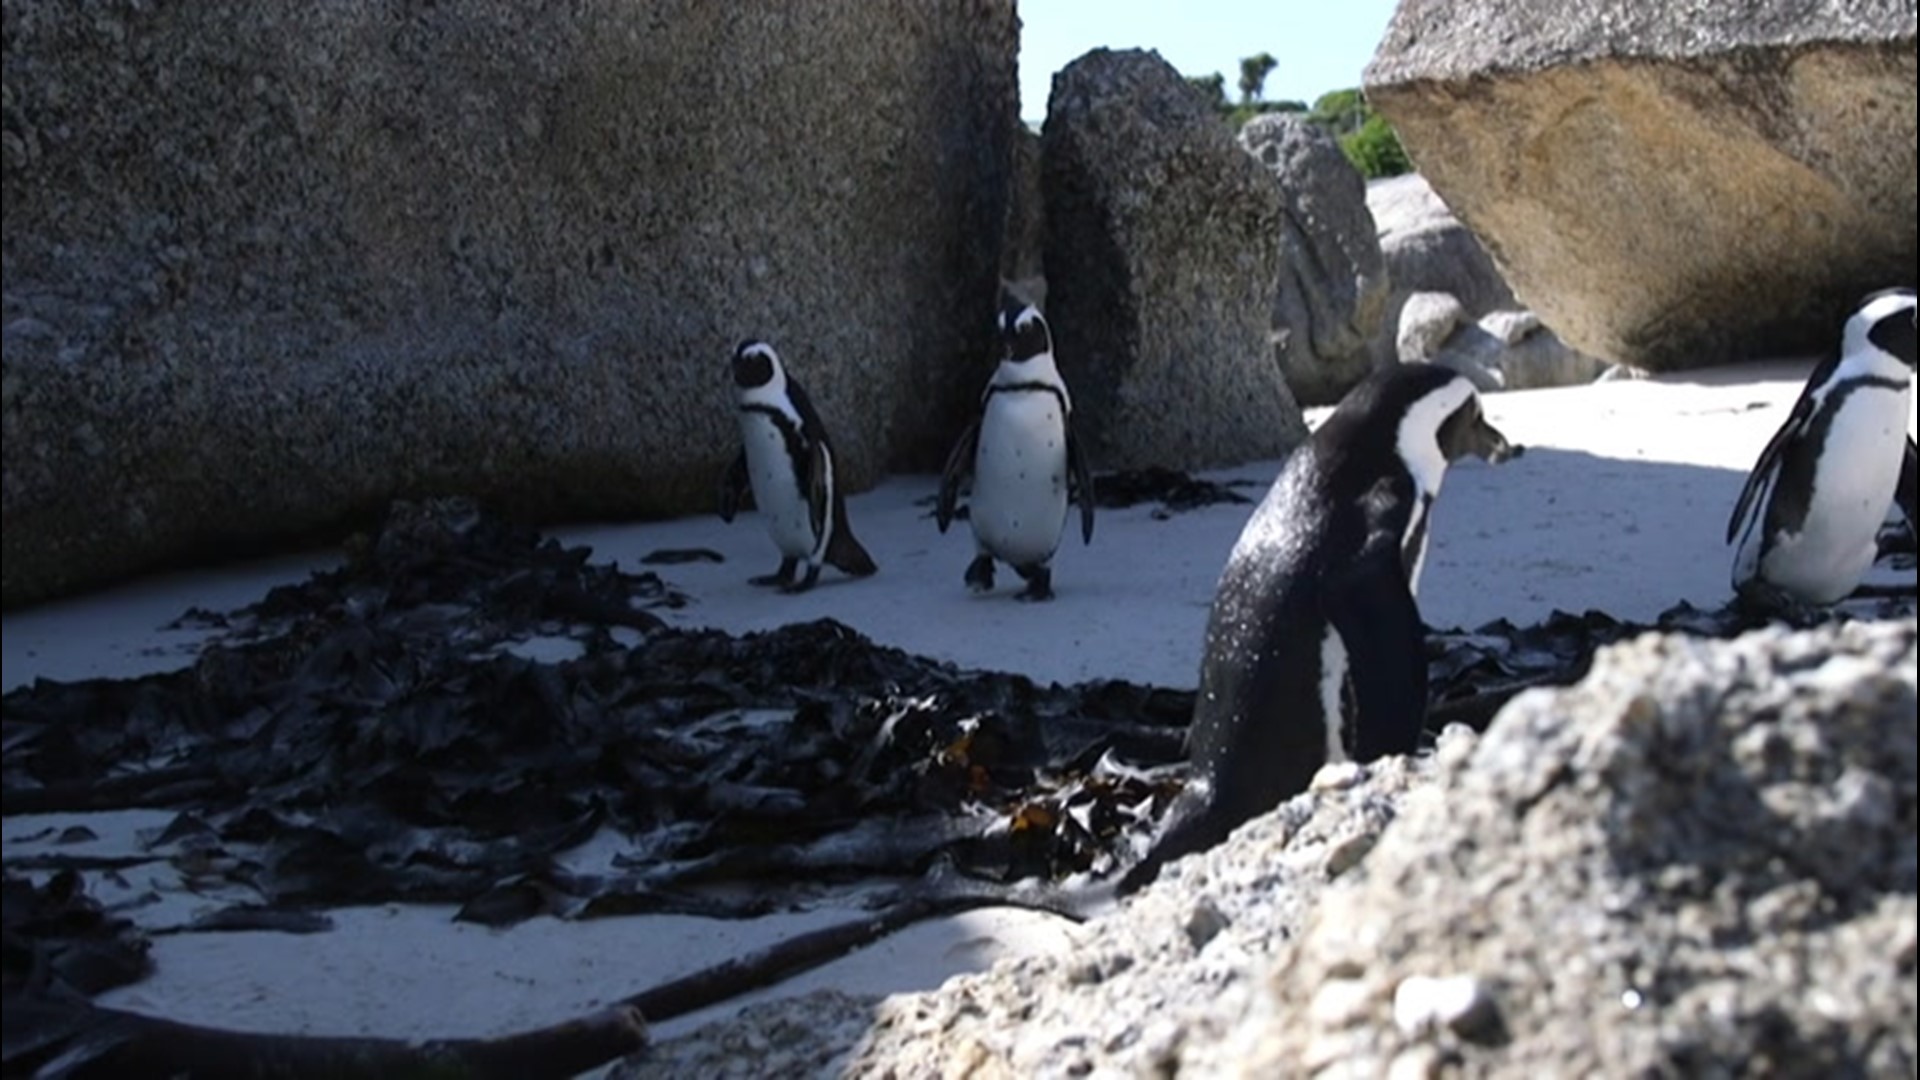 During the months of December and January, endangered African penguins go through a molting period that puts them at risk to enter the ocean.